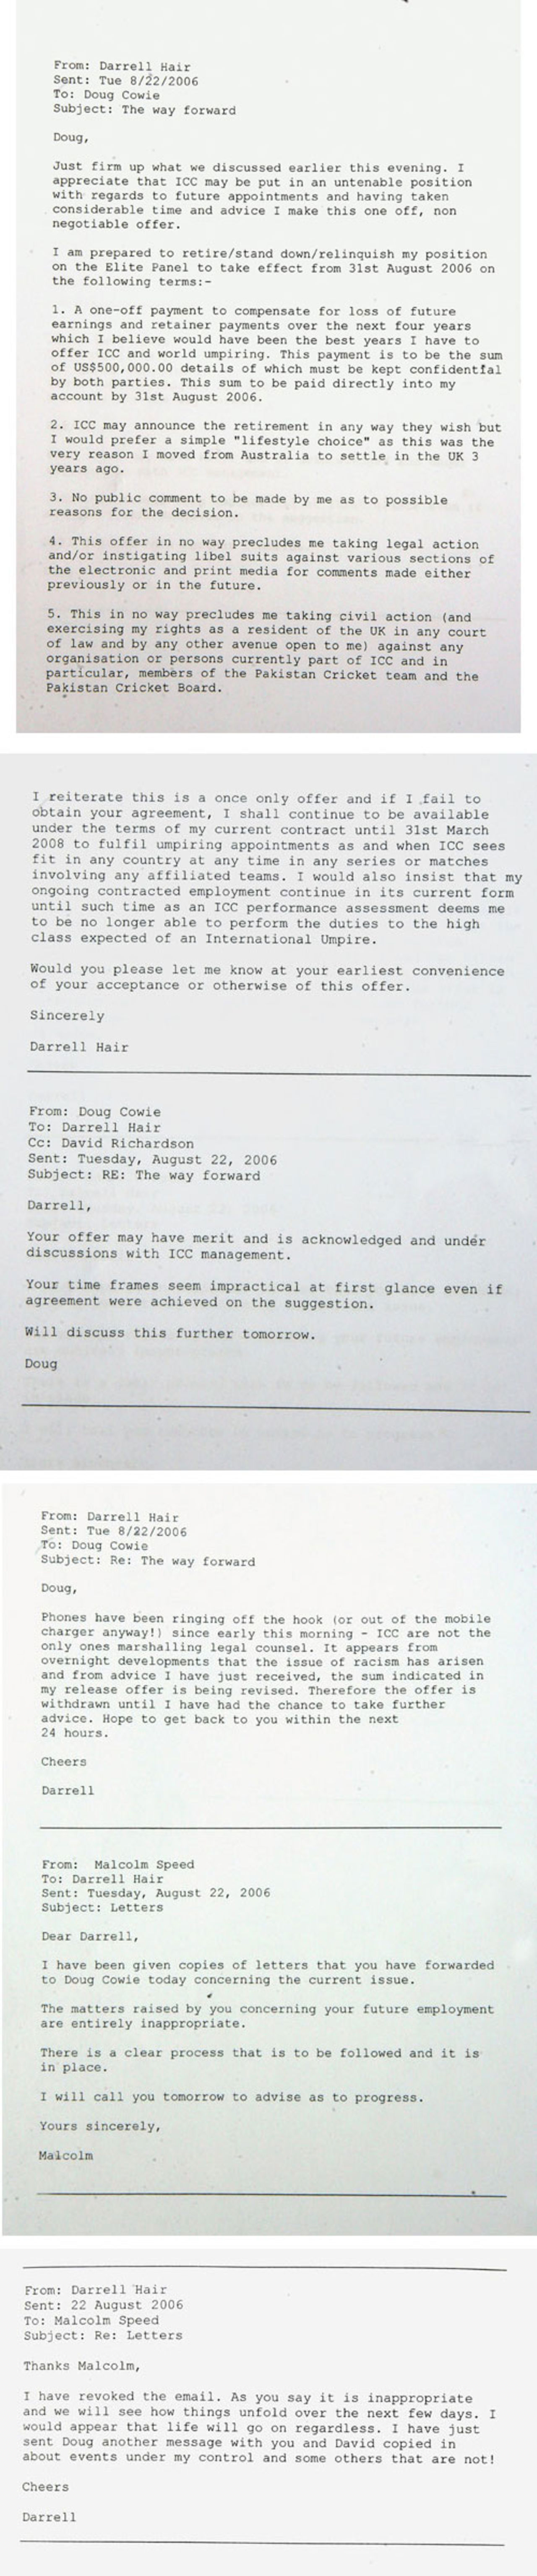 The email exchanges between Darrell Hair, Doug Cowie and Macolm Speed, August, 2006